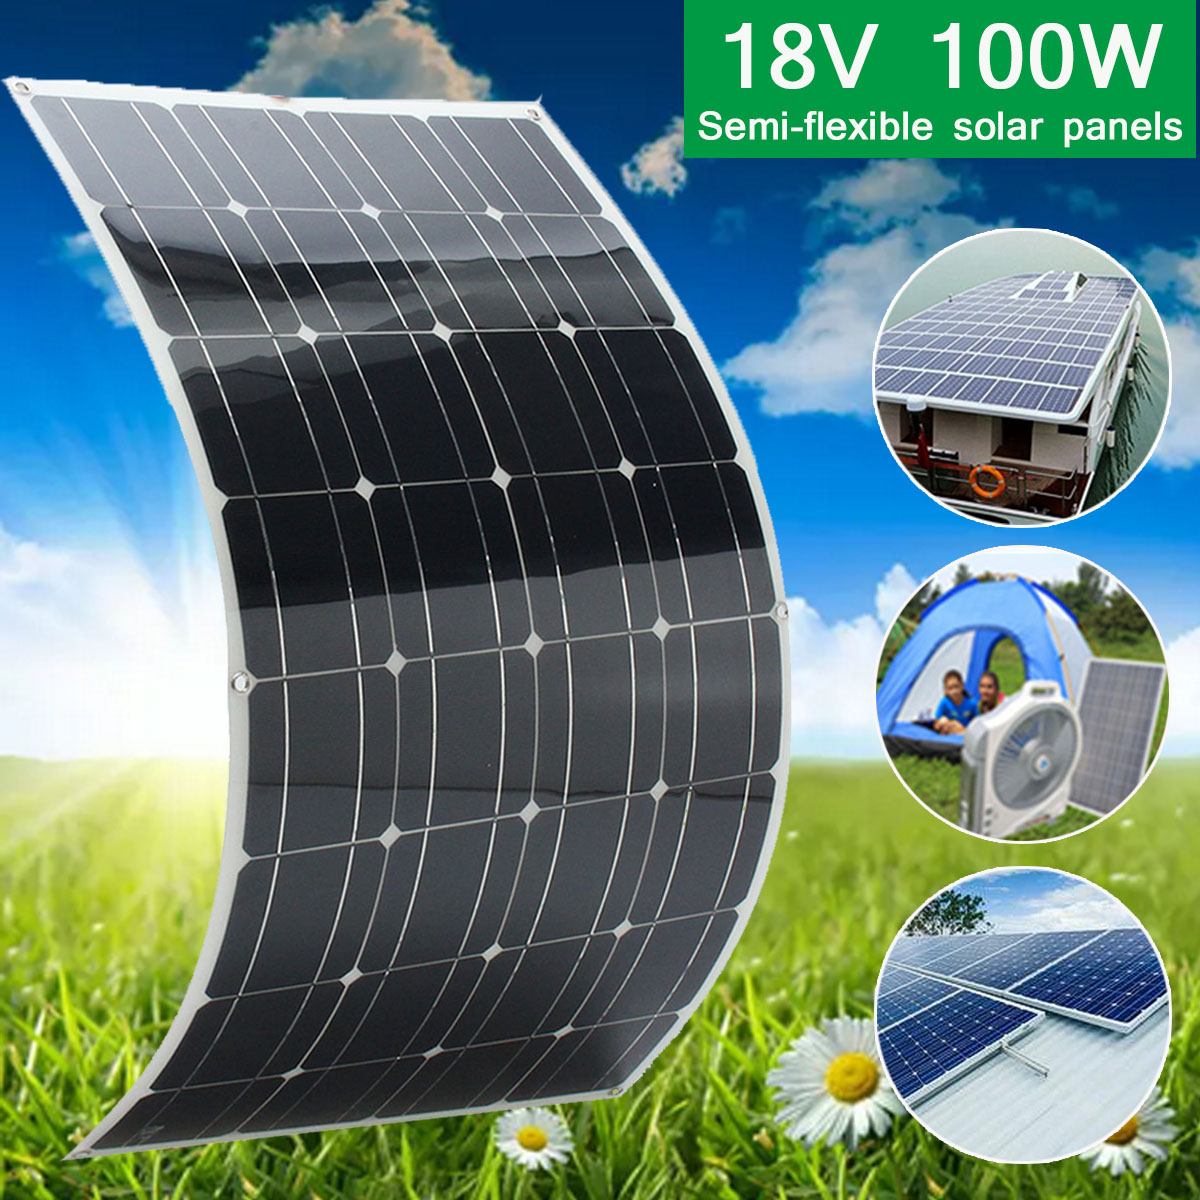 Elfeland® SP-38 18V 100W 1050x540x2.5mm Flexible Solar Panel With 1.5m Cable 1